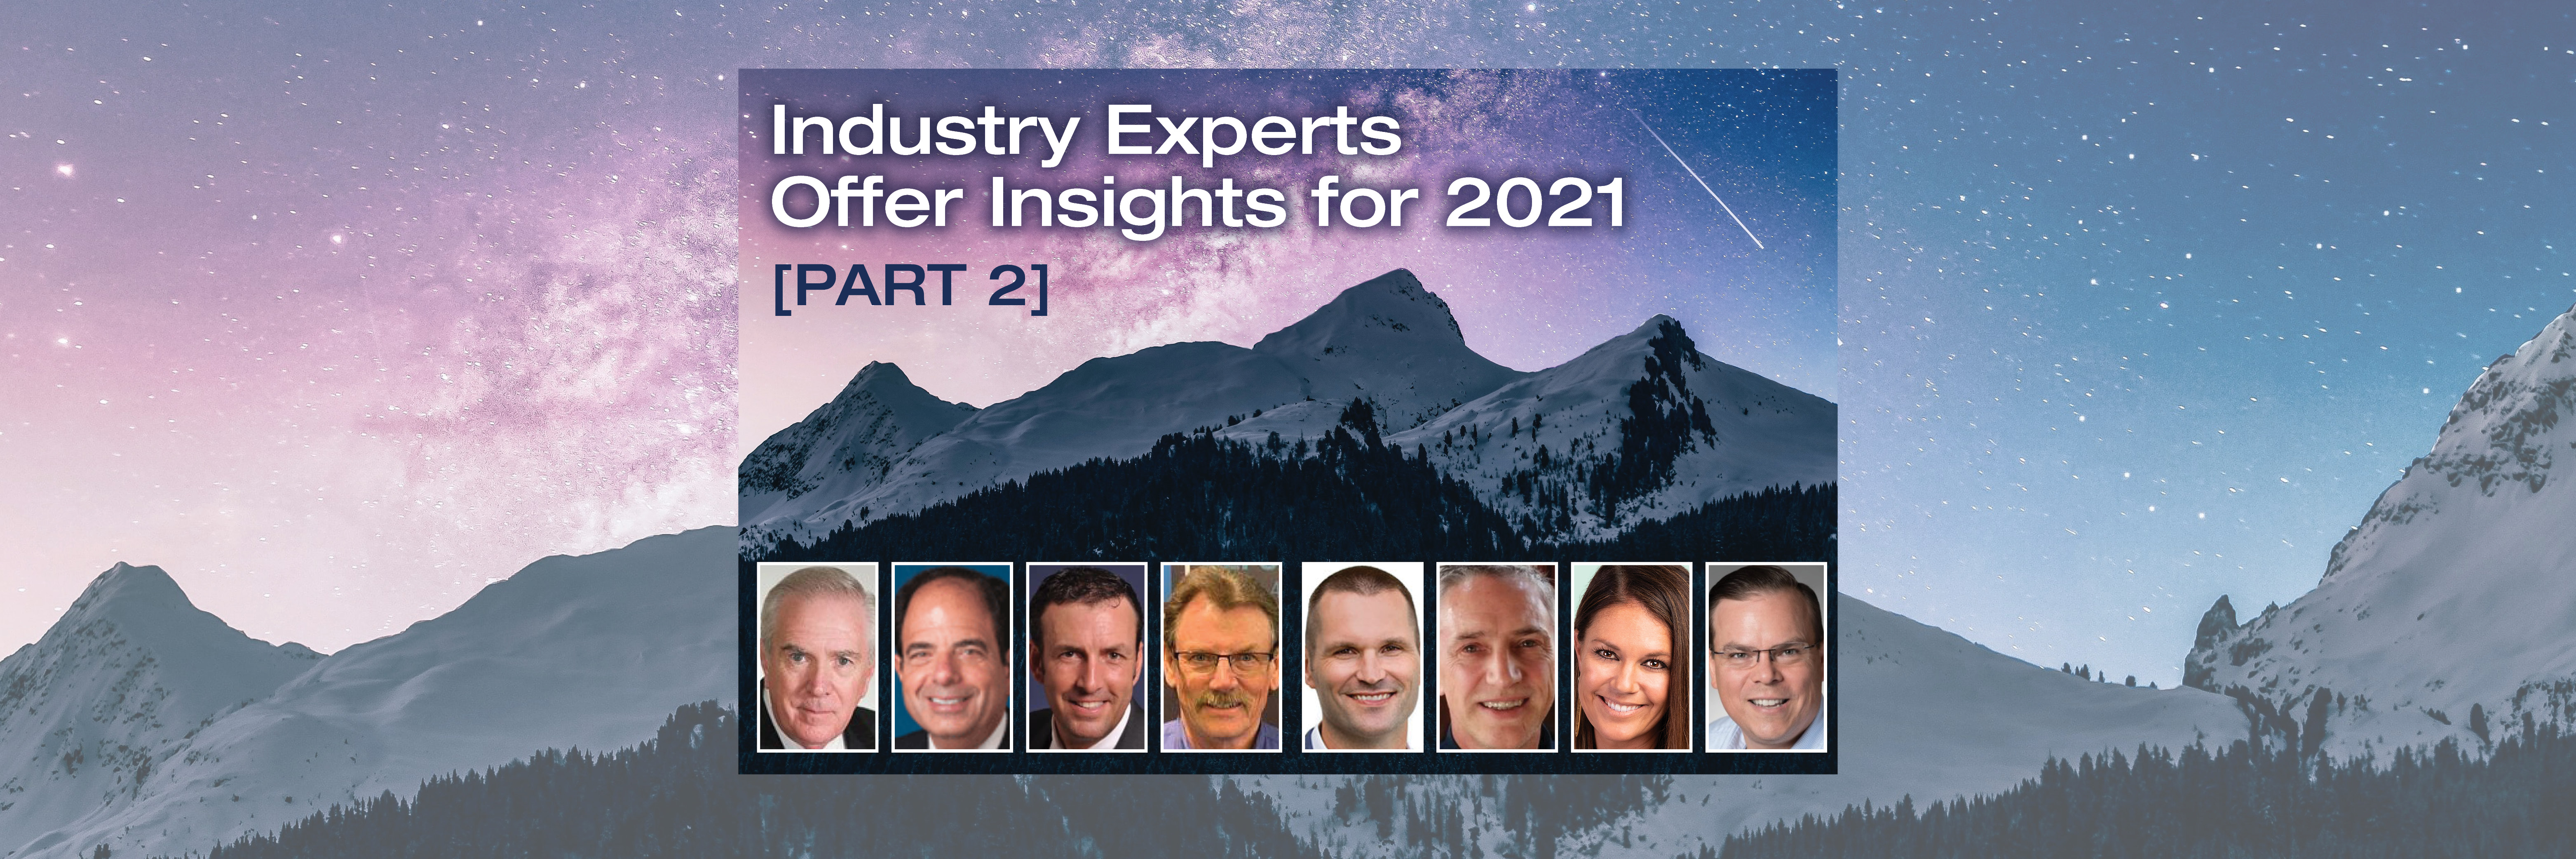 Industry Experts Pt 2 (002)